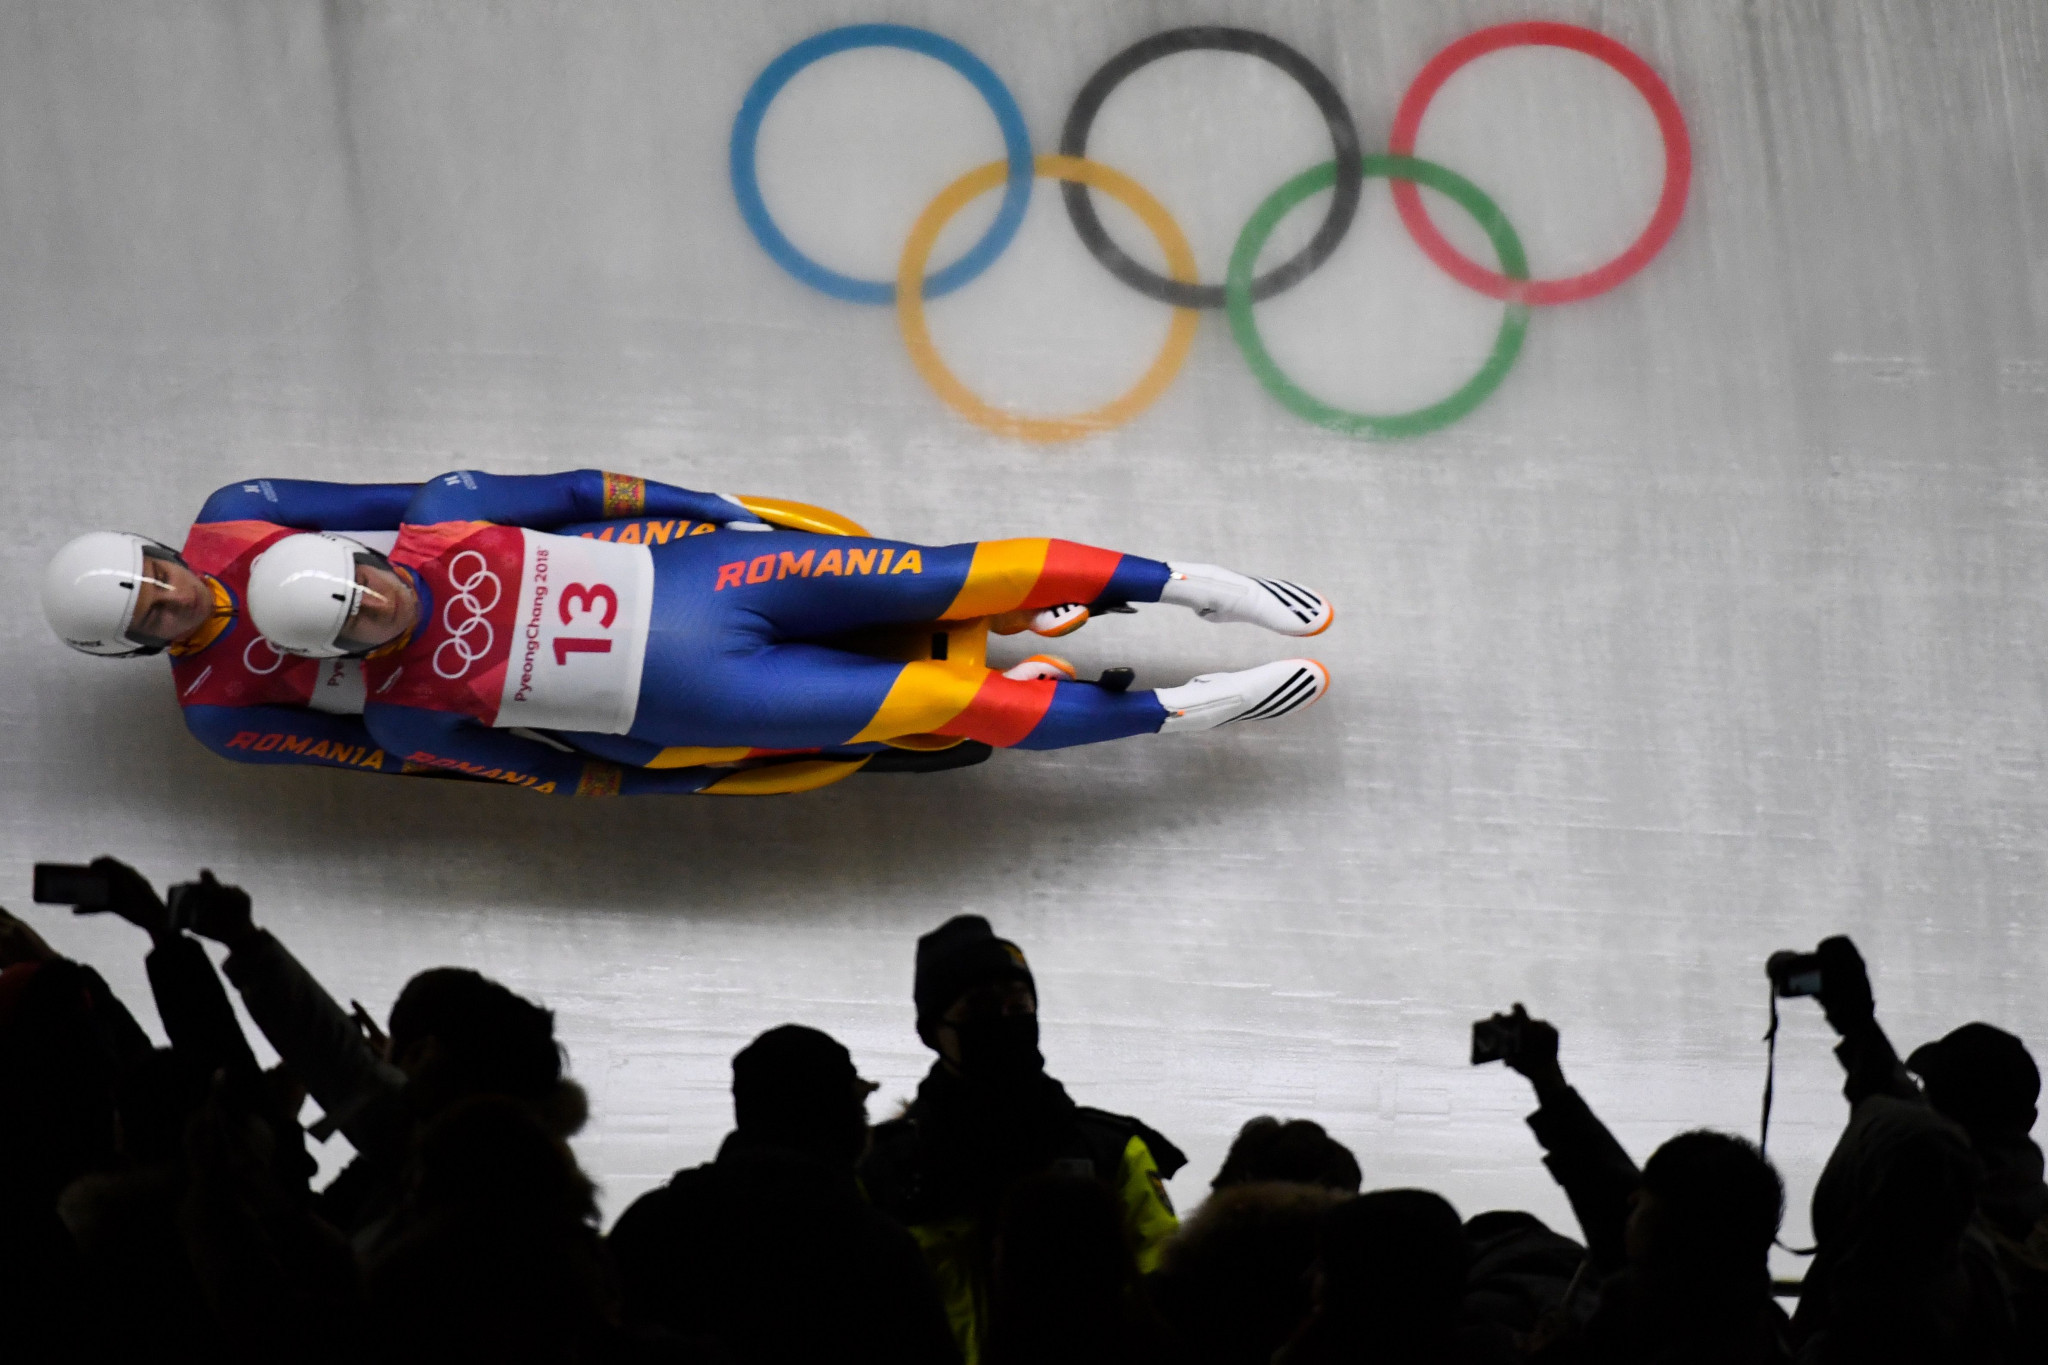 The development role supported emerging luge nations ©Getty Images